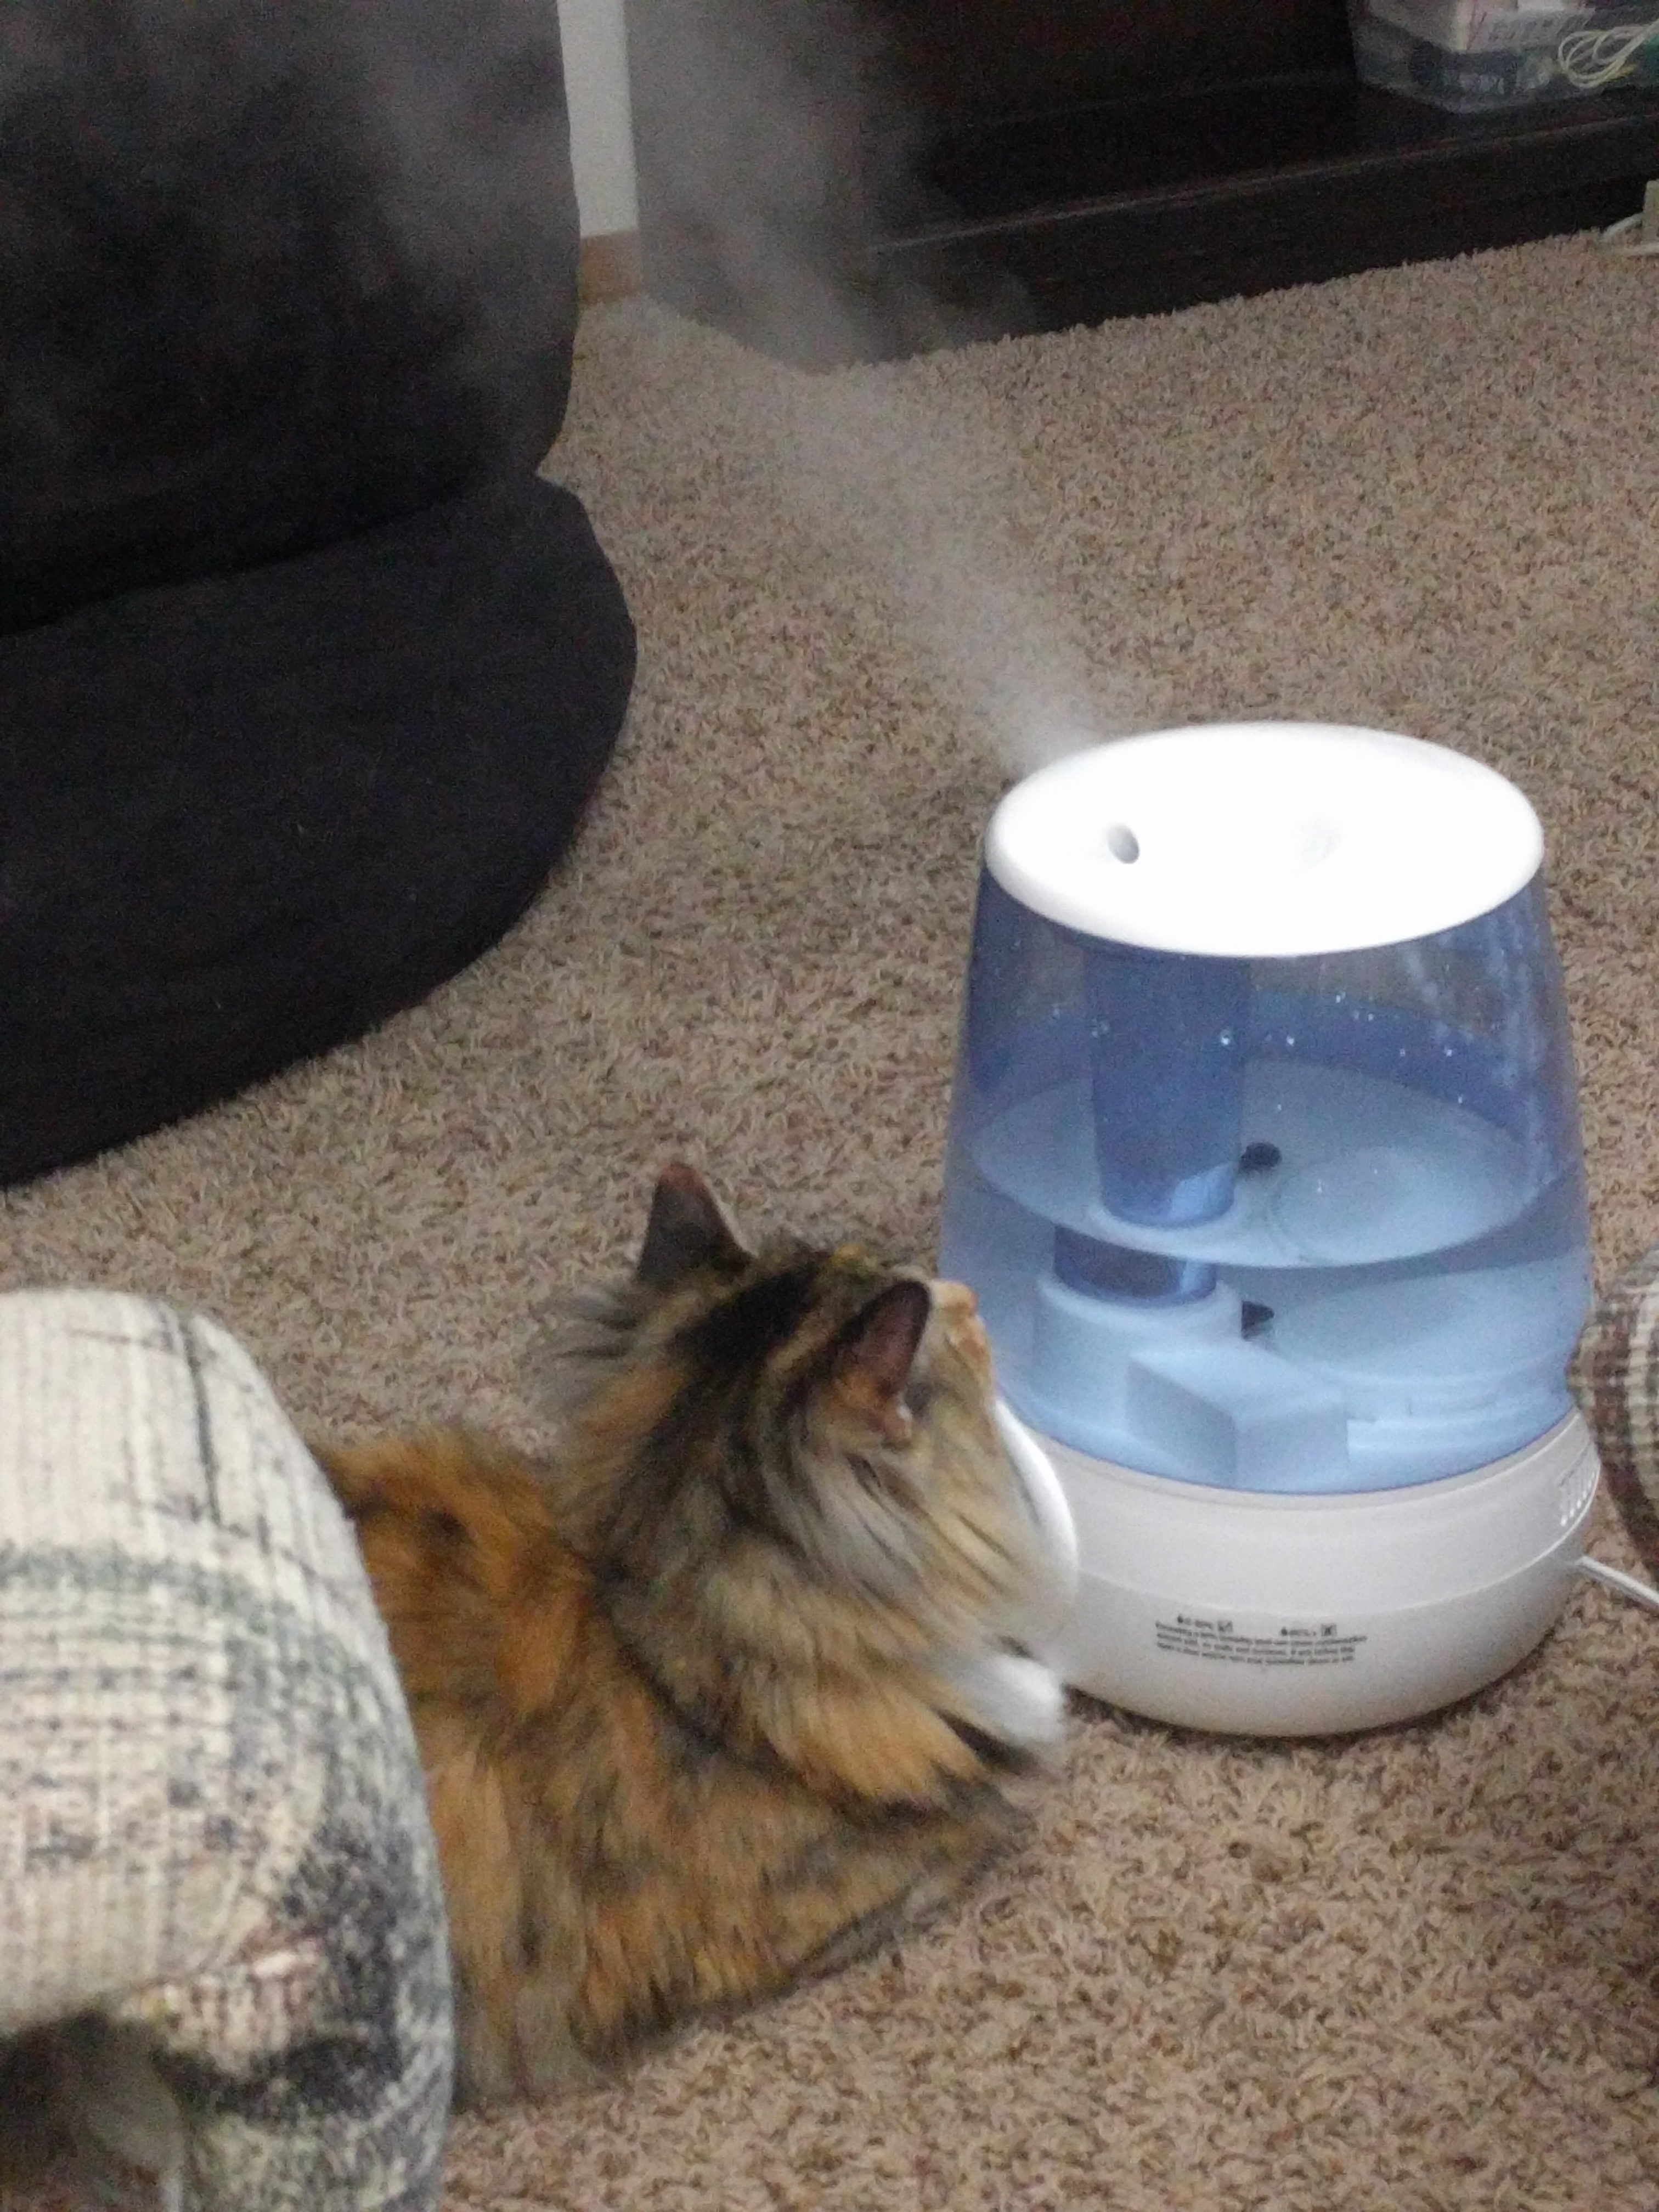 Tally laying on the ground right next to the humidifier, looking up at a puff of water